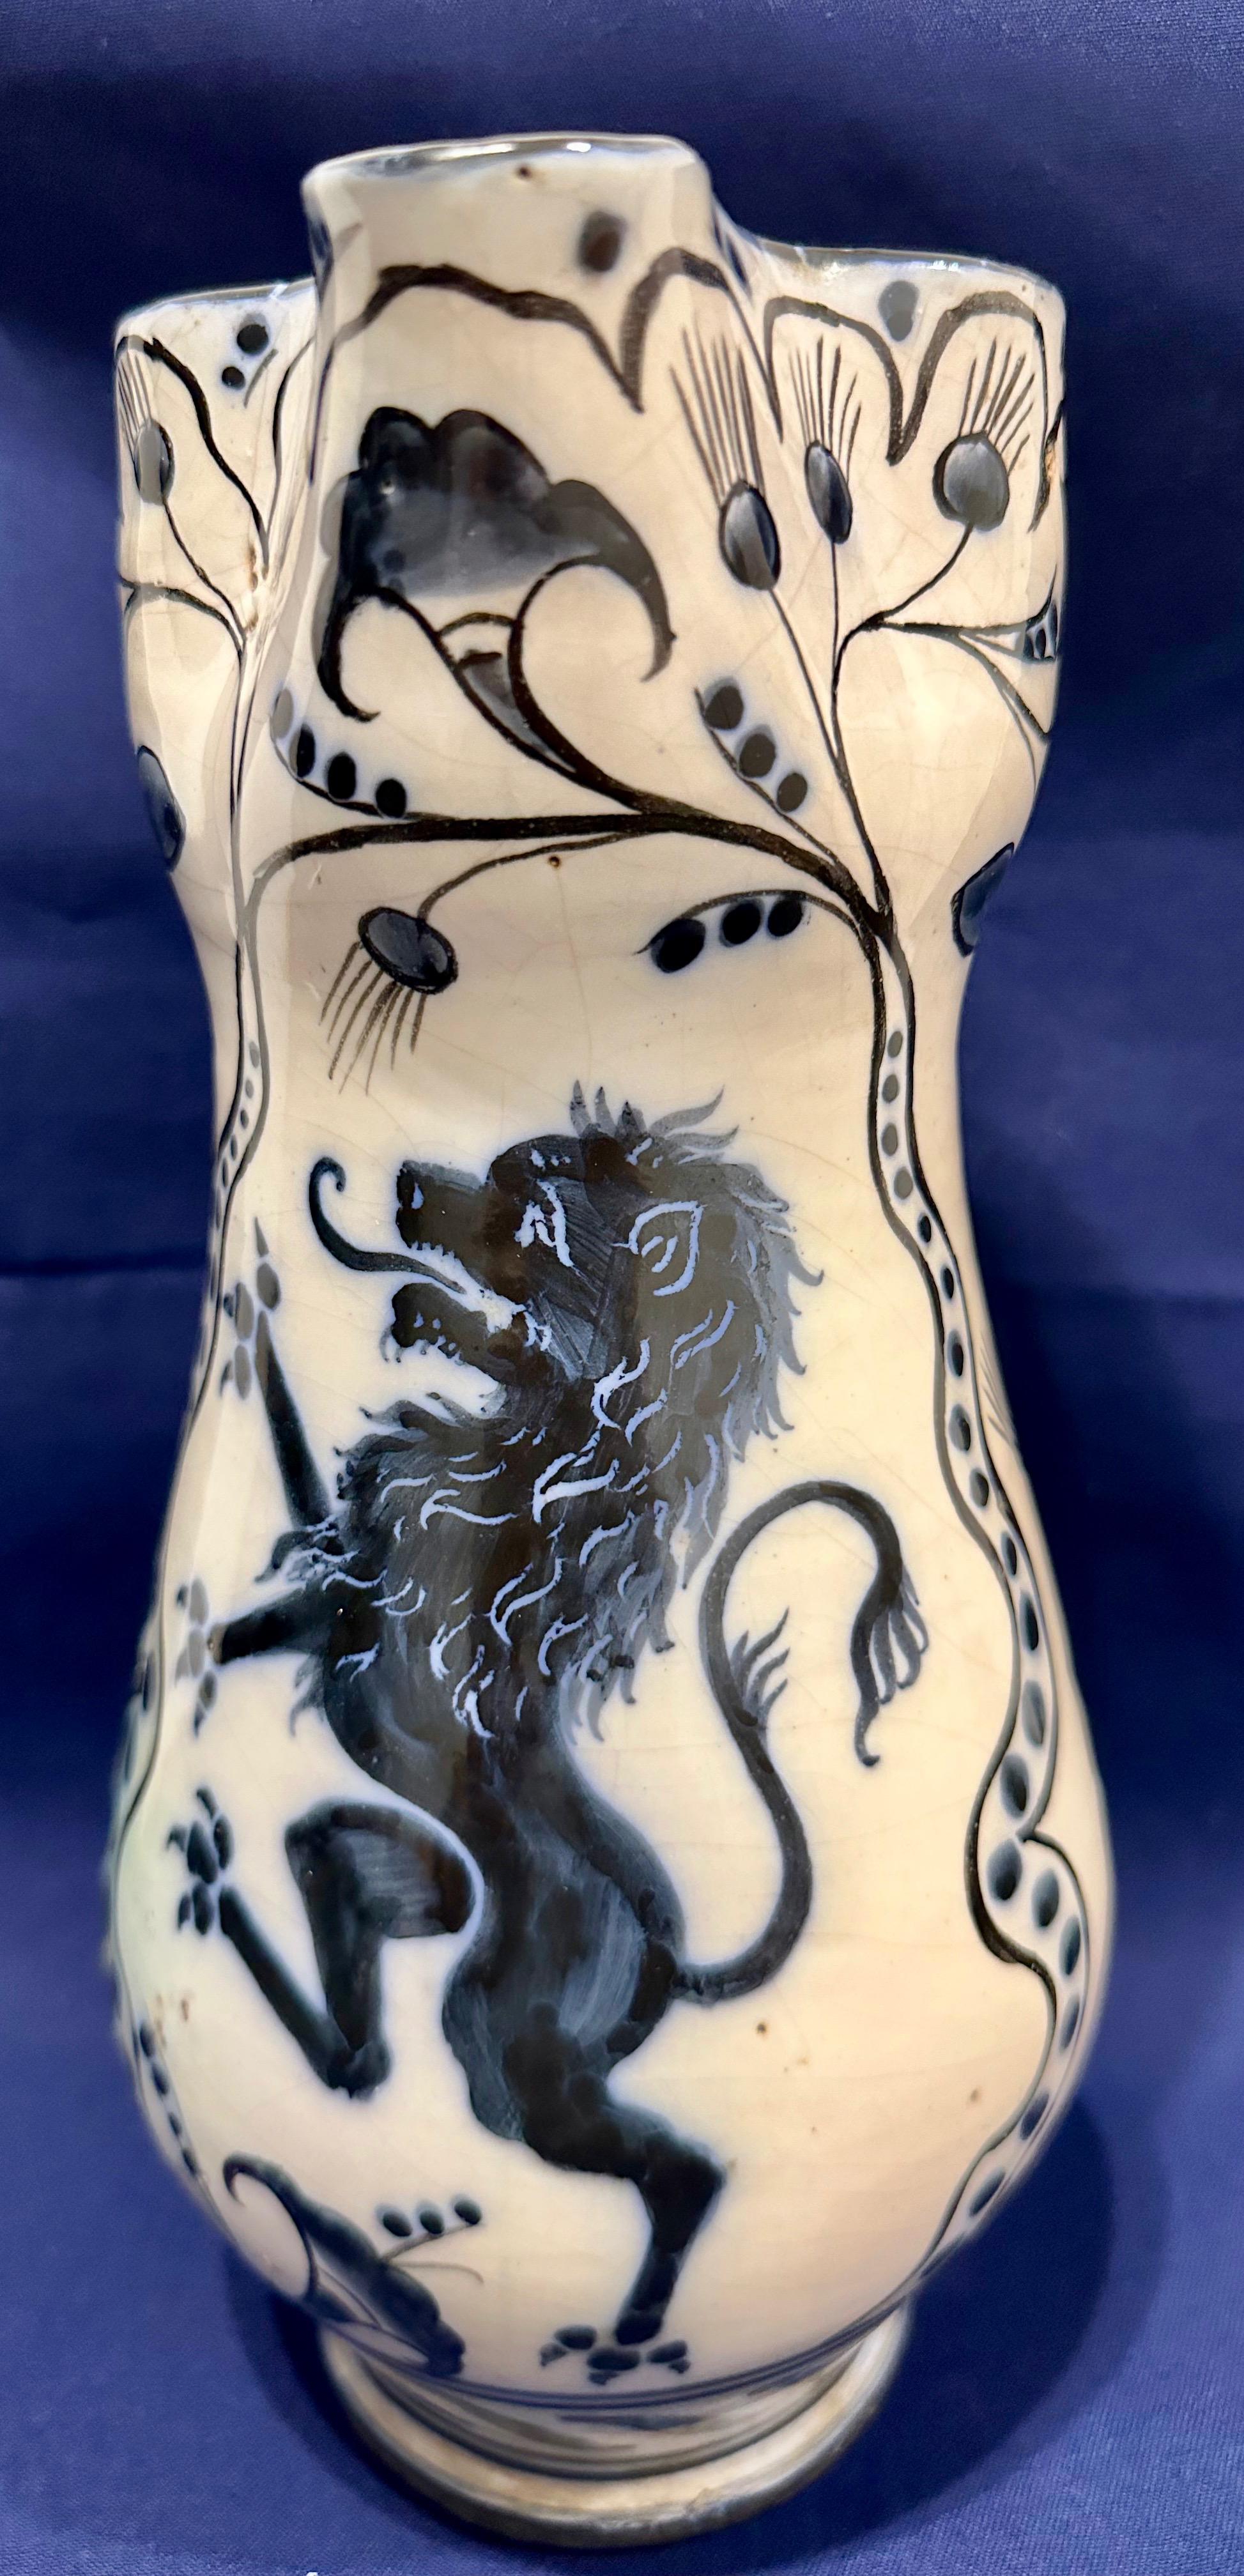 Italian Maiolica Pitcher with a Rampant Lion, Central Italy , Ca 1850

This unmarked Maiolica Pitcher with a cream white background is decorated on the front with a cobalt blue rampant lion. The remaining surface is decorated in dark blue with